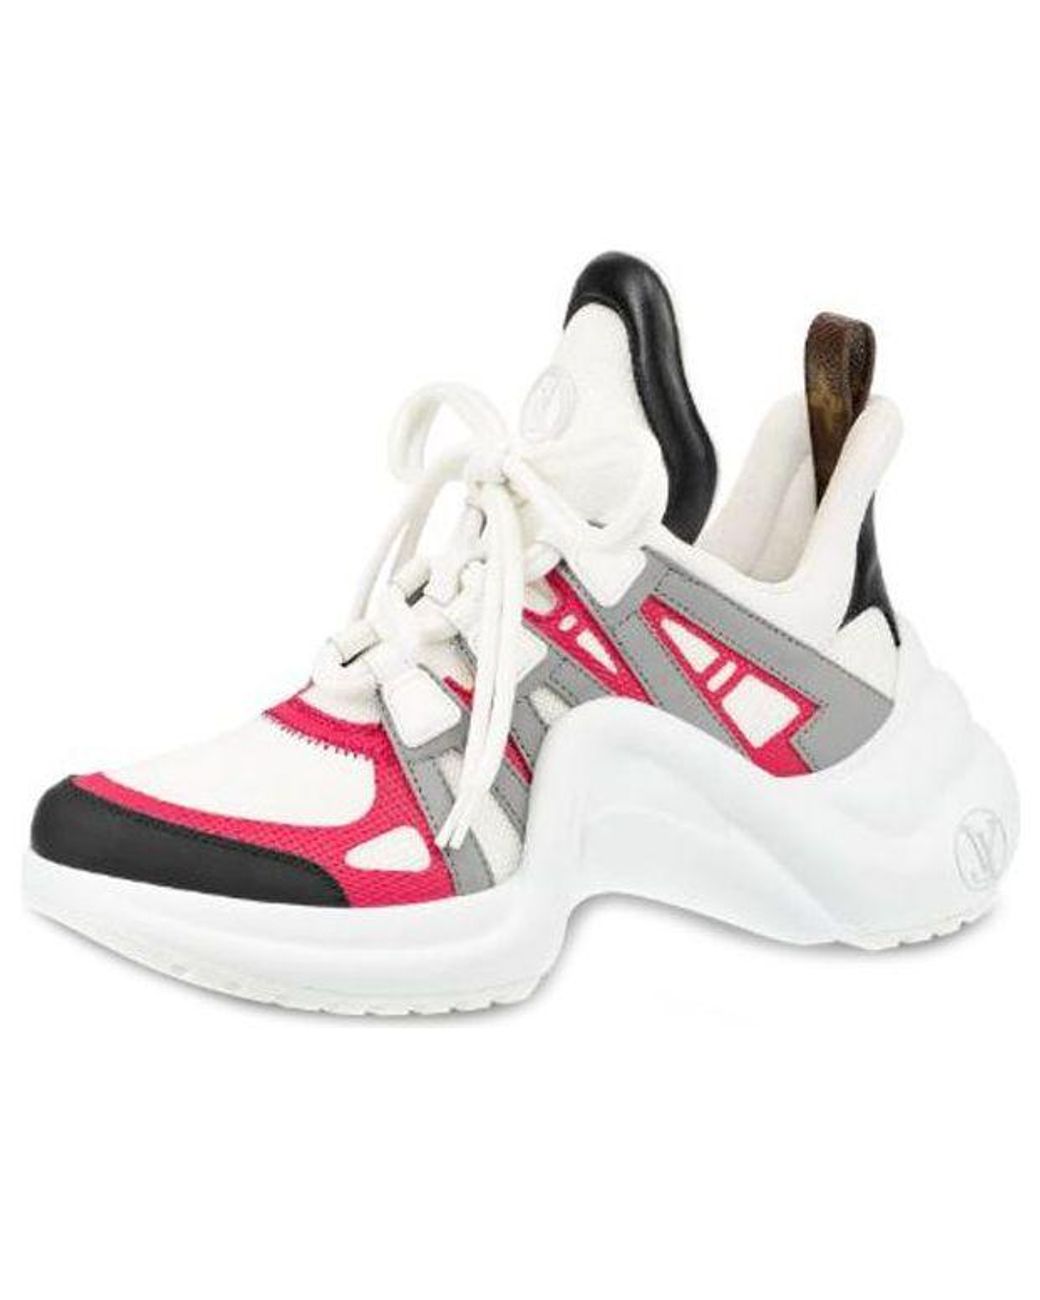 Louis Vuitton Lv Archlight Sports Shoes Pink/white | Lyst